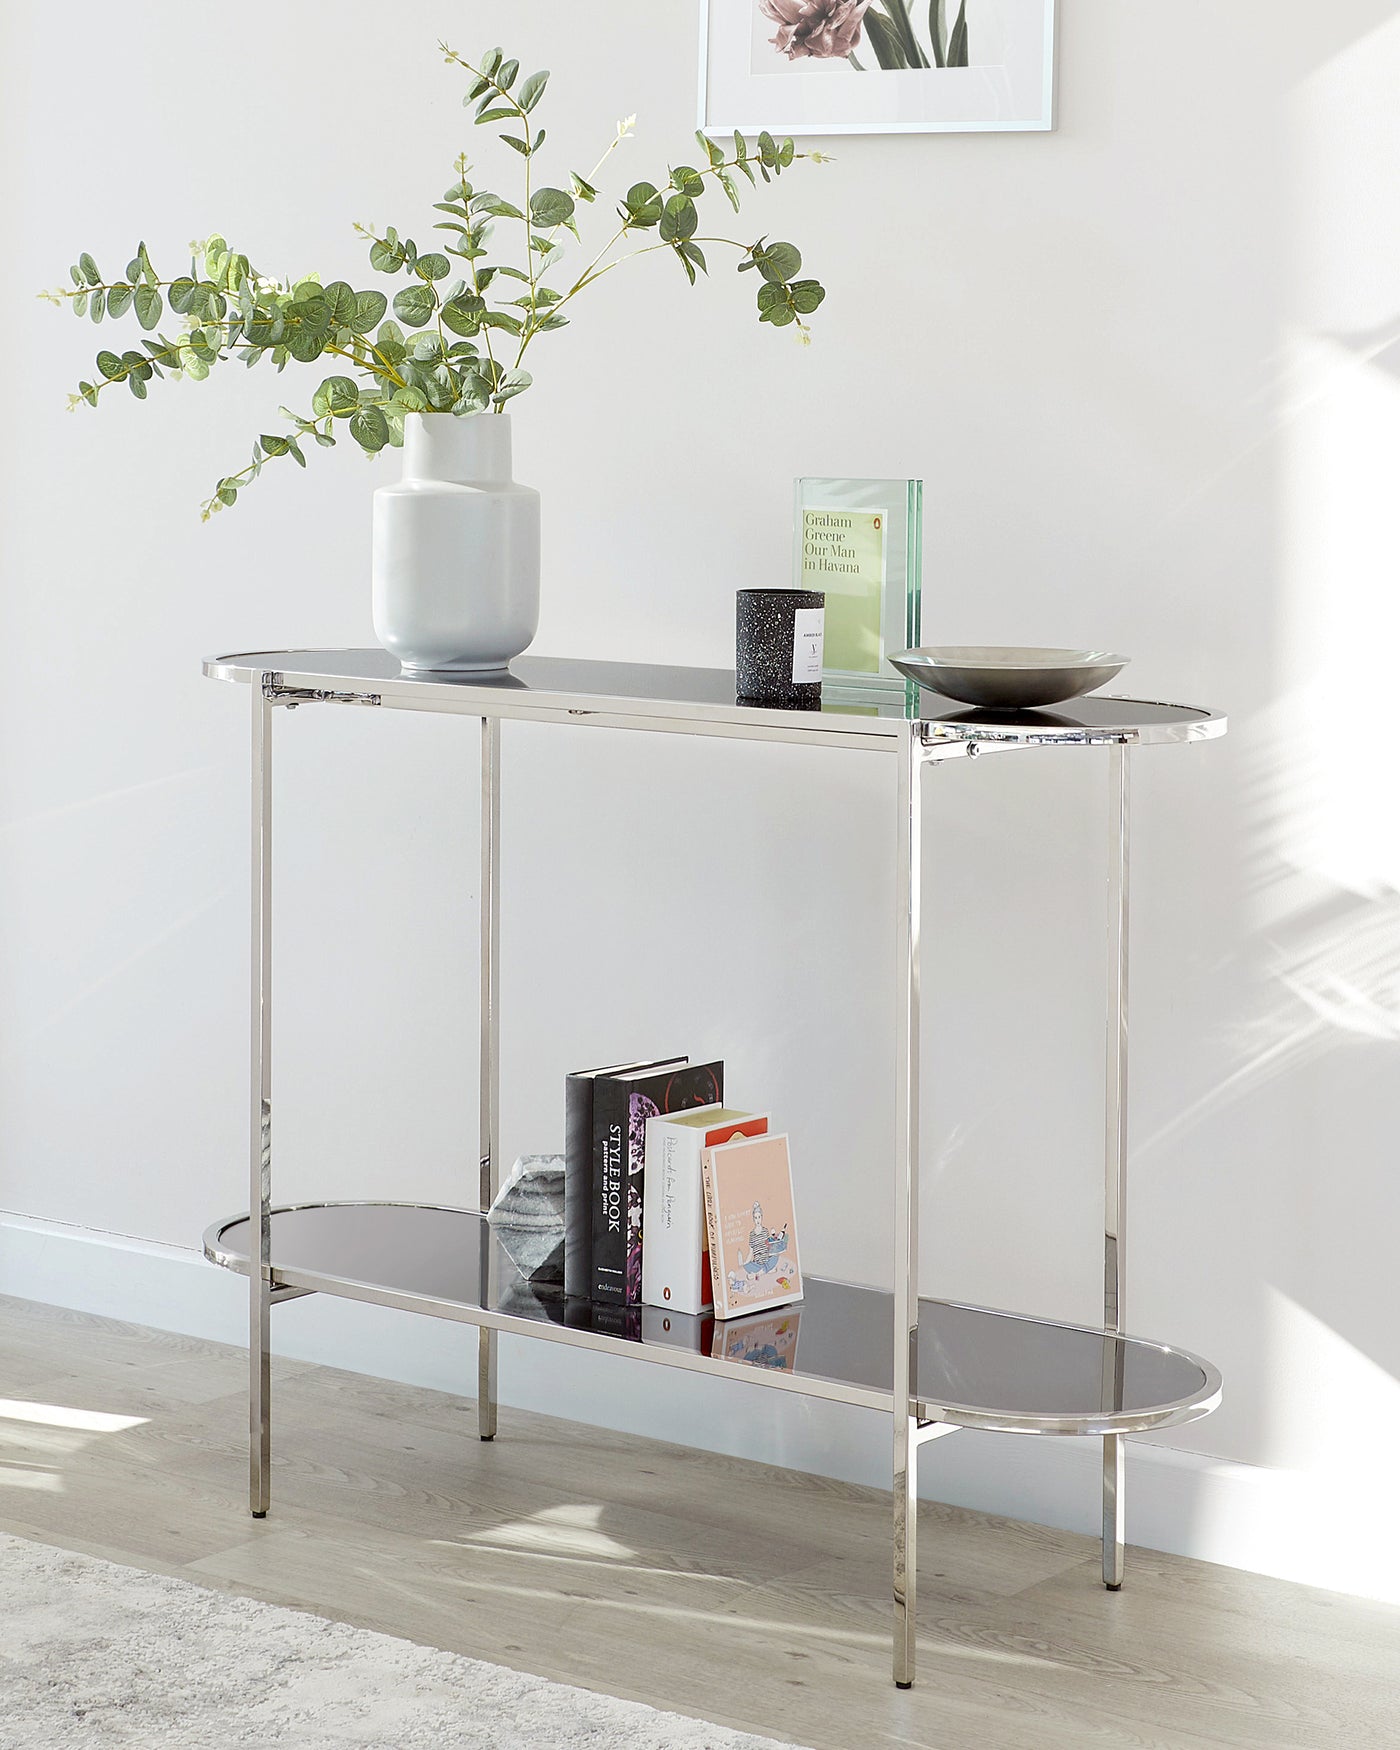 A modern, sleek console table with a reflective chrome finish and two levels. The top surface is rectangular, while the lower shelf is semi-circular, creating an elegant contrast. The table is adorned with a vase of greenery, books, and decorative items.